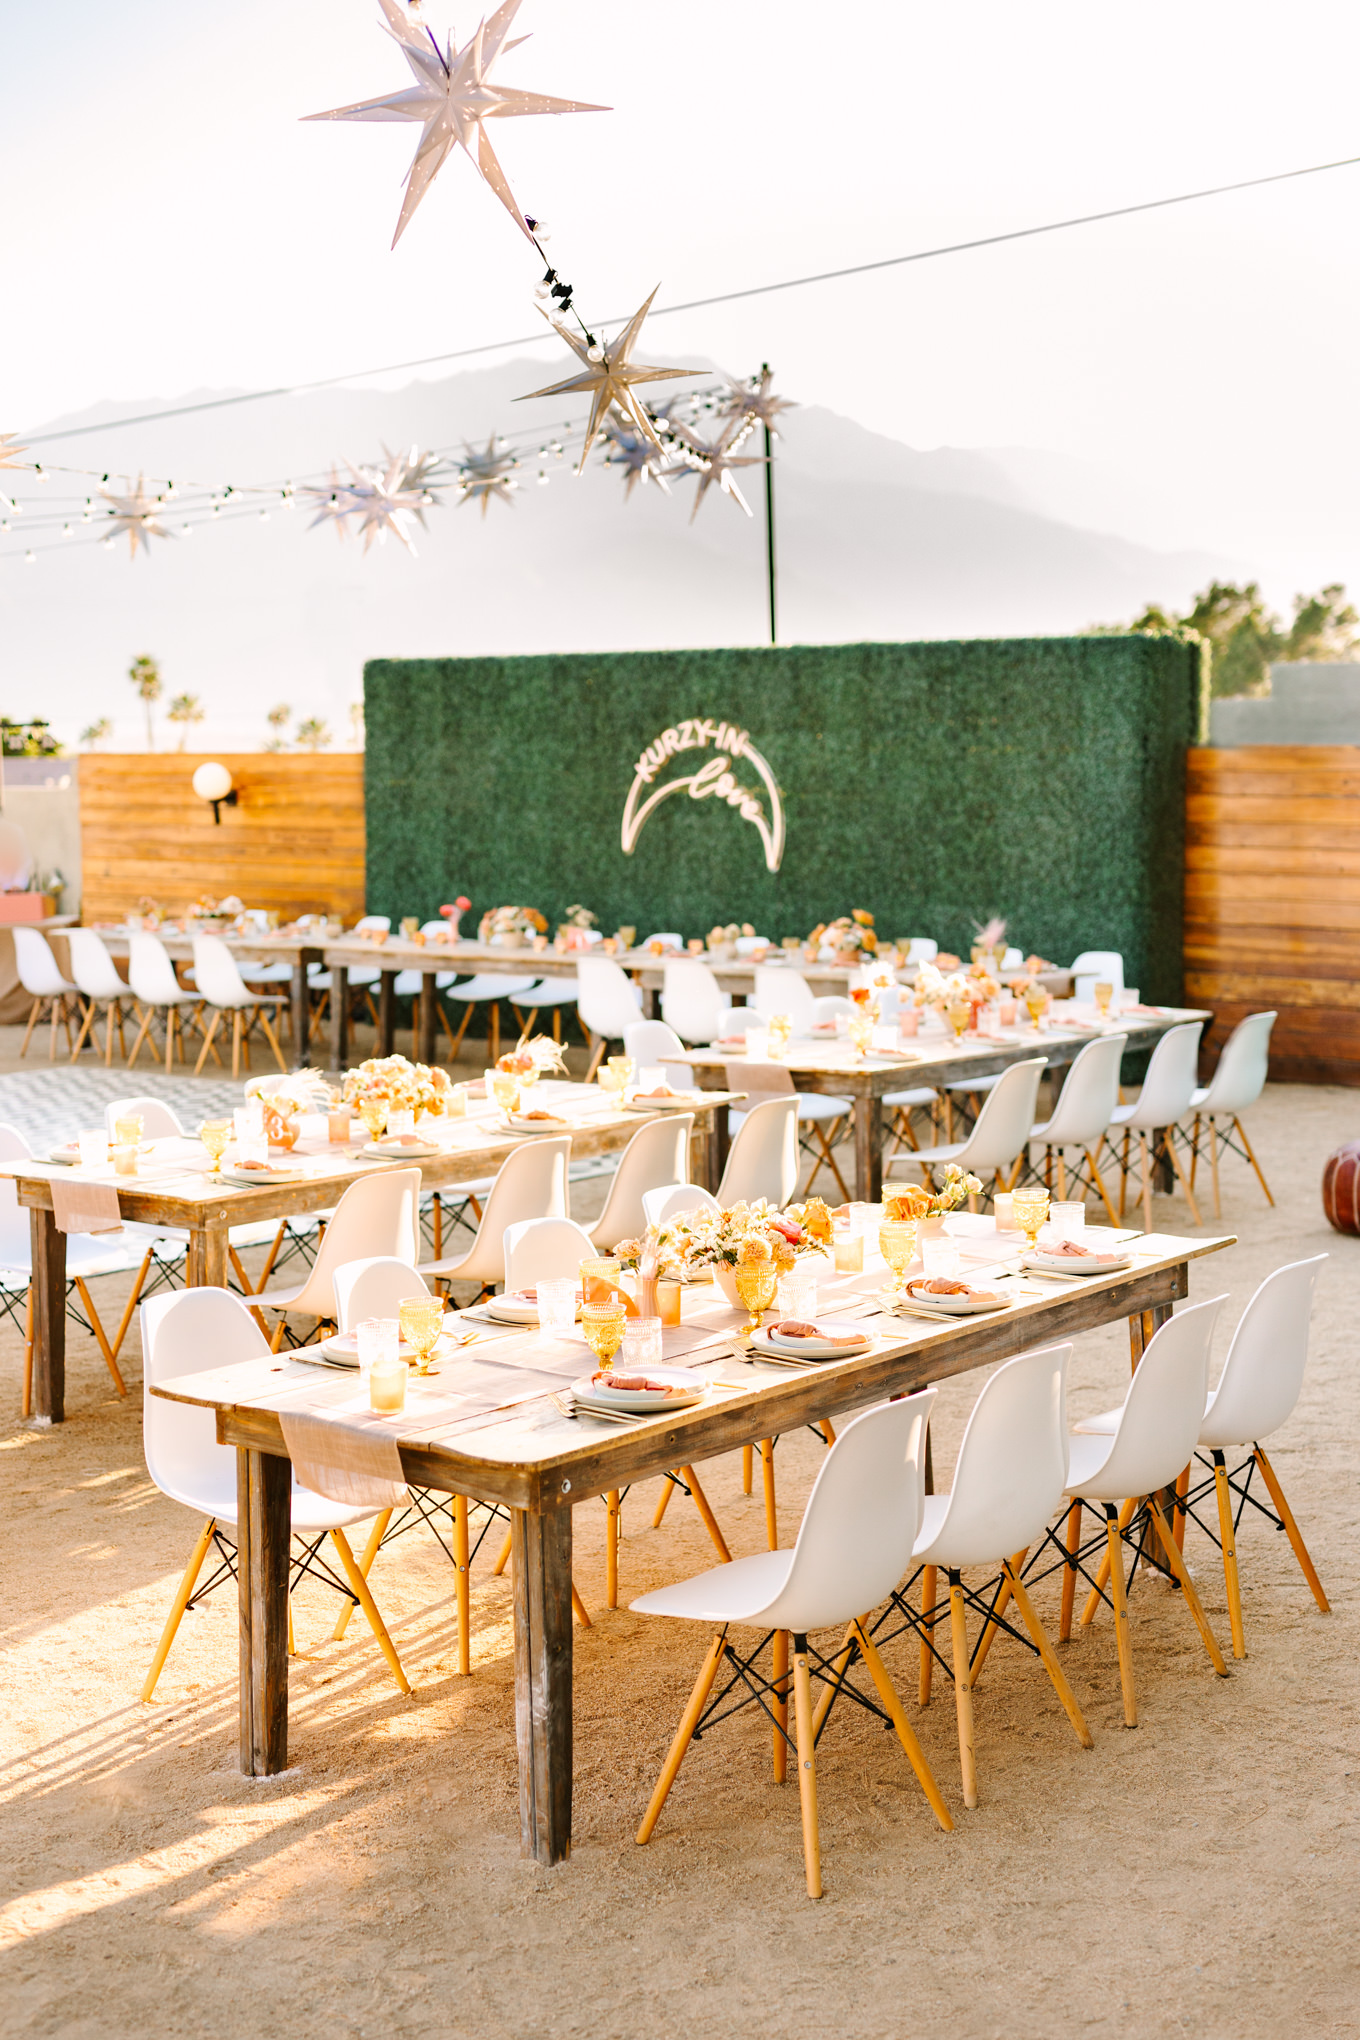 Wedding reception | Pink and orange Lautner Compound wedding | Colorful Palm Springs wedding photography | #palmspringsphotographer #palmspringswedding #lautnercompound #southerncaliforniawedding  Source: Mary Costa Photography | Los Angeles